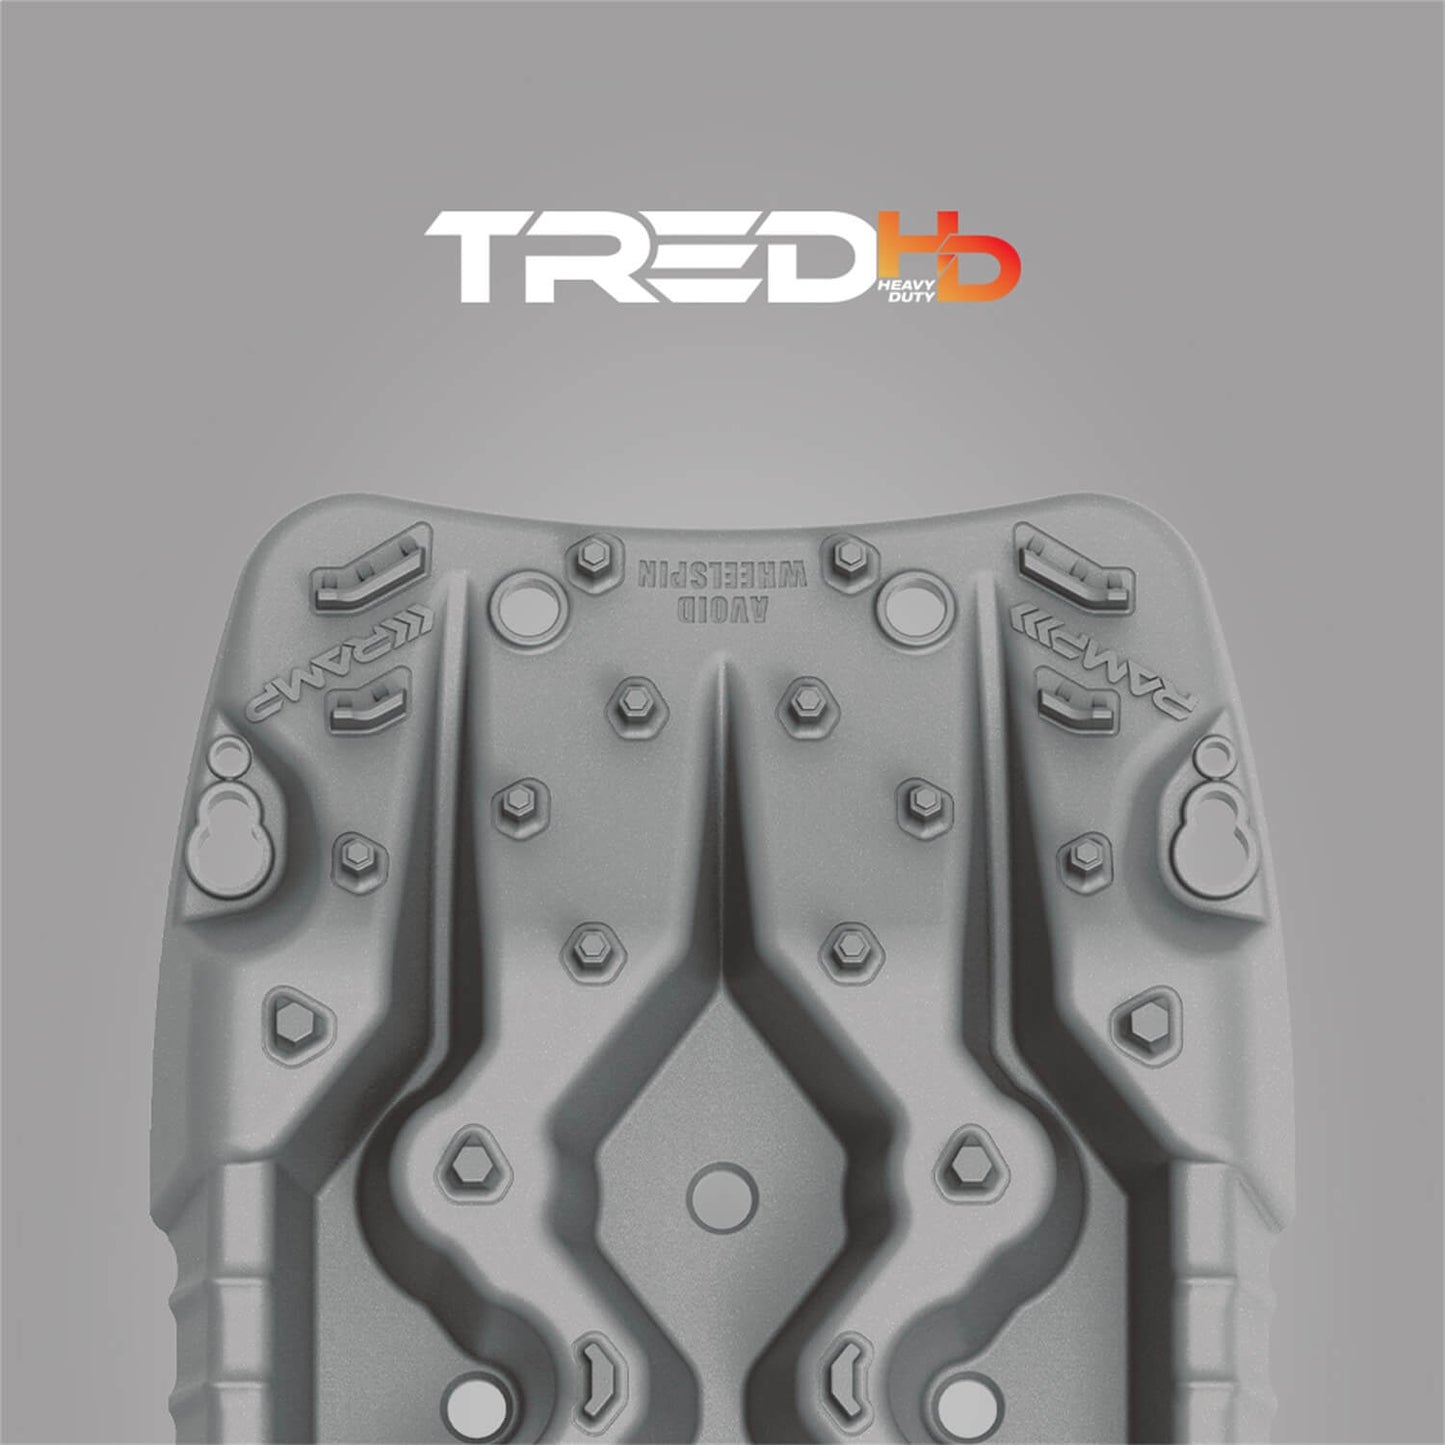 ARB - TREDHDSI - TRED HD Silver Recovery Boards